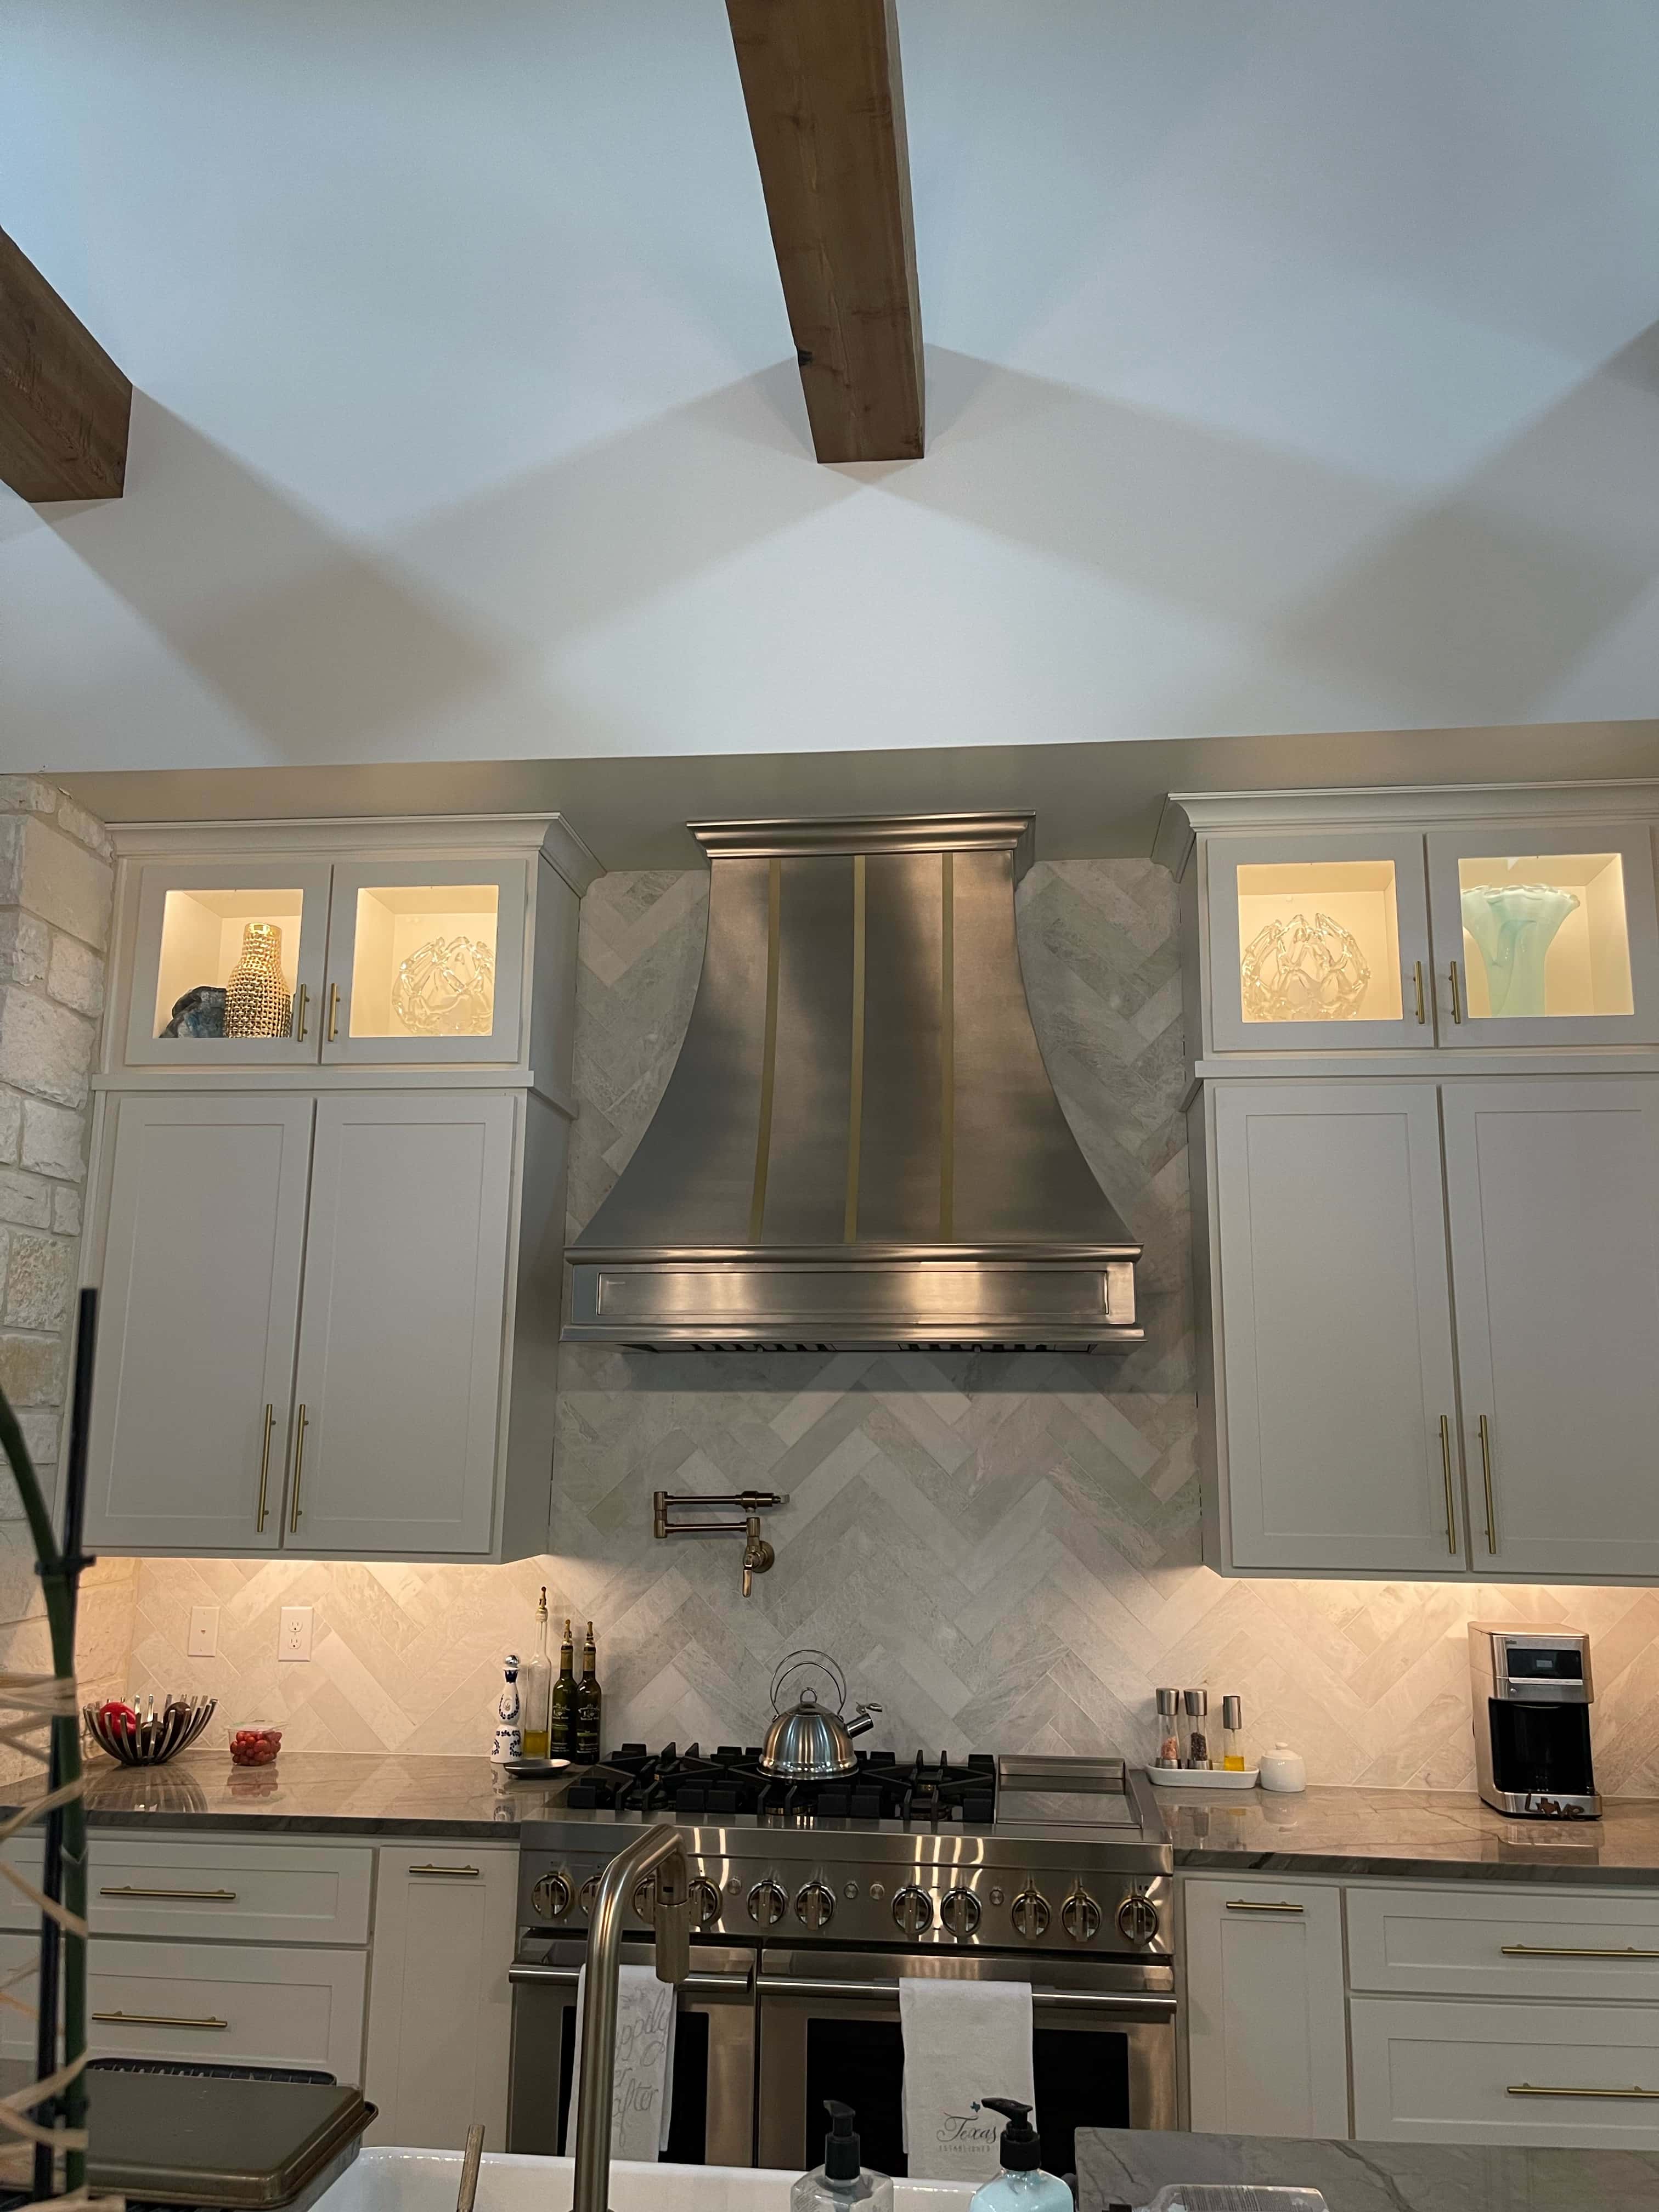 Remarkable range hood captivate classic kitchen planning, enveloped in the pure elegance of white kitchen cabinets